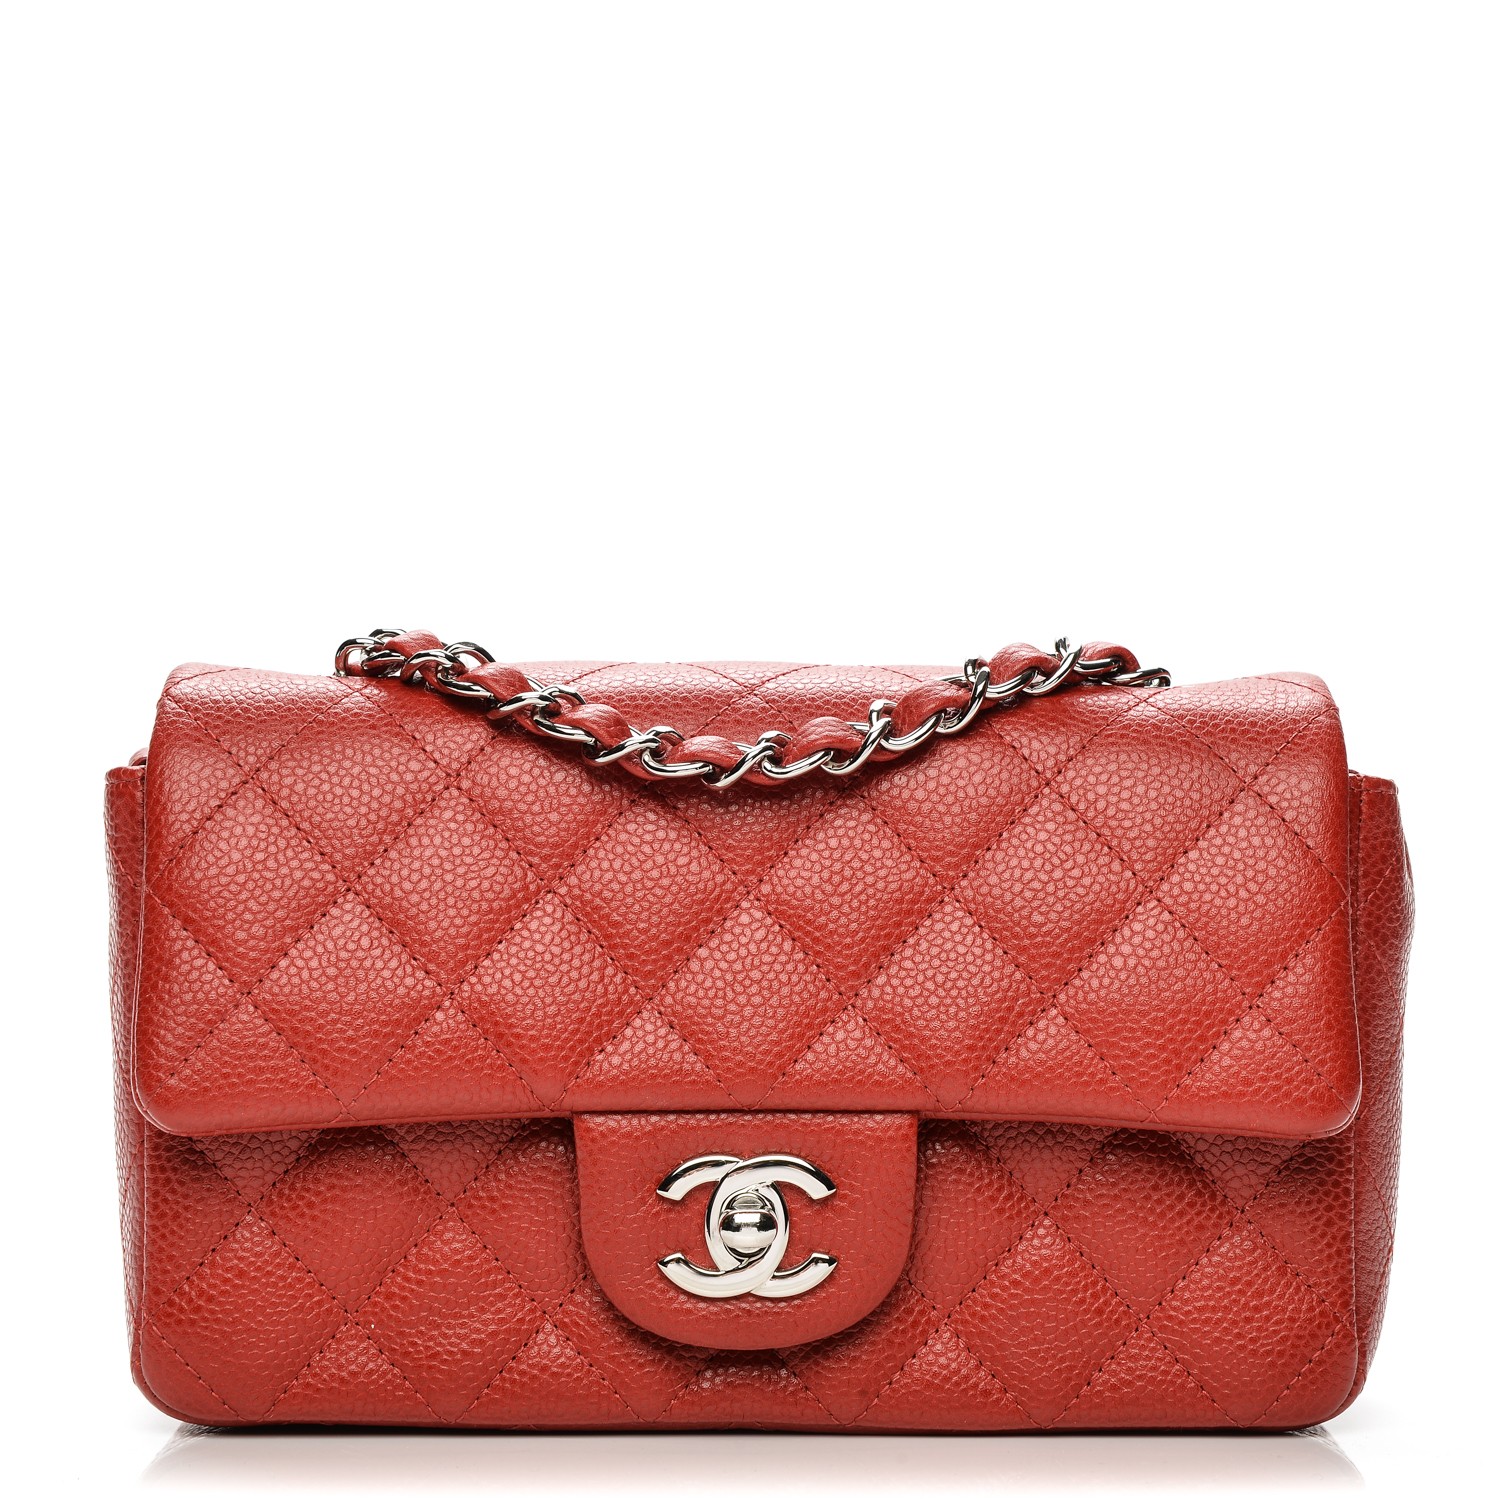 CHANEL Caviar Quilted Mini Rectangular Flap Red 202447 | FASHIONPHILE